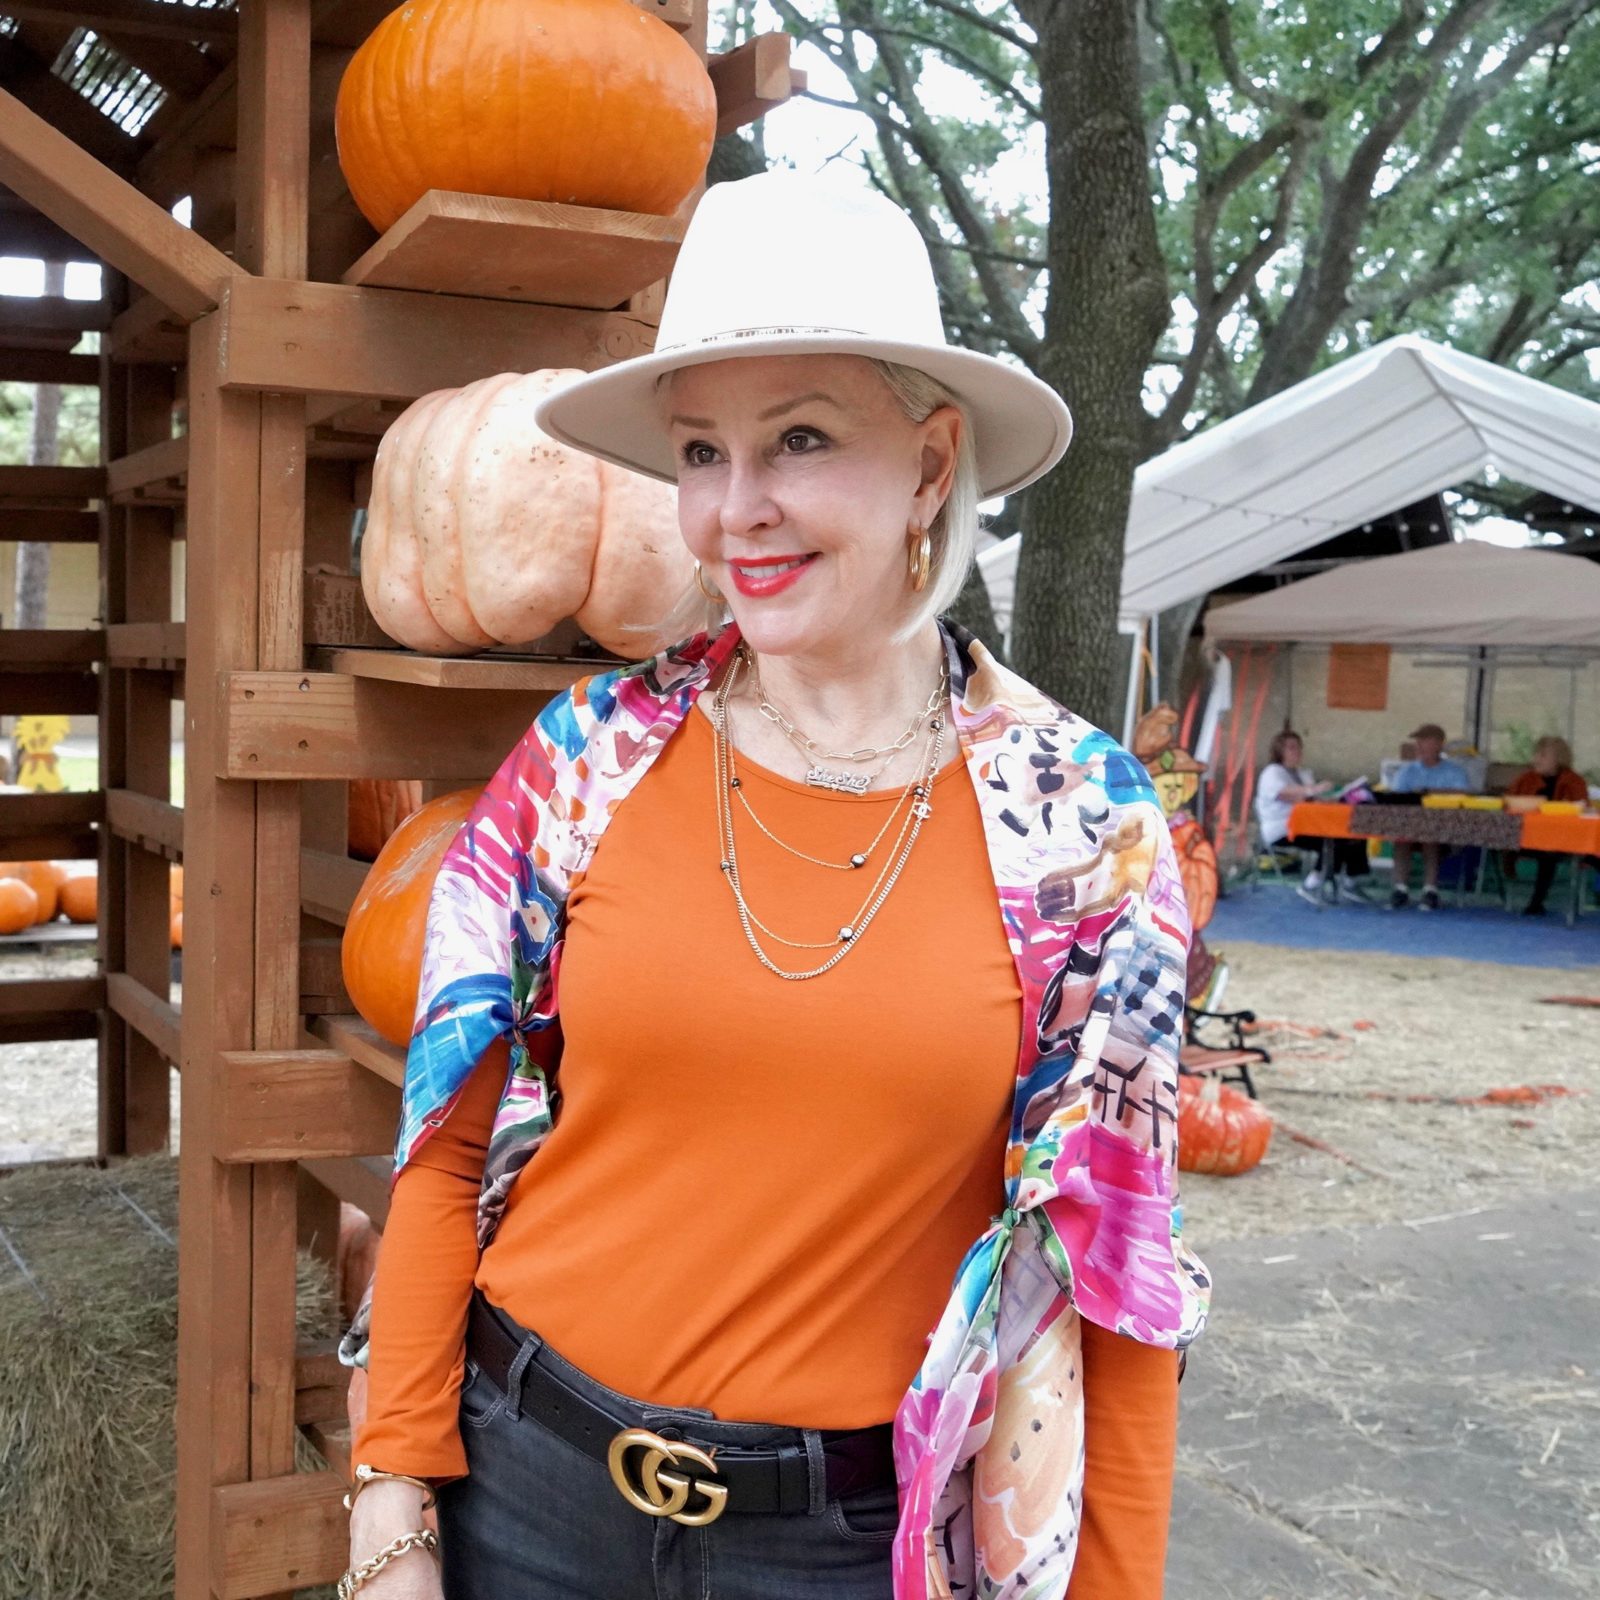 Sheree Frede of the SheShe Show weqring orange top with colorful scarf as a wrap and off white hat